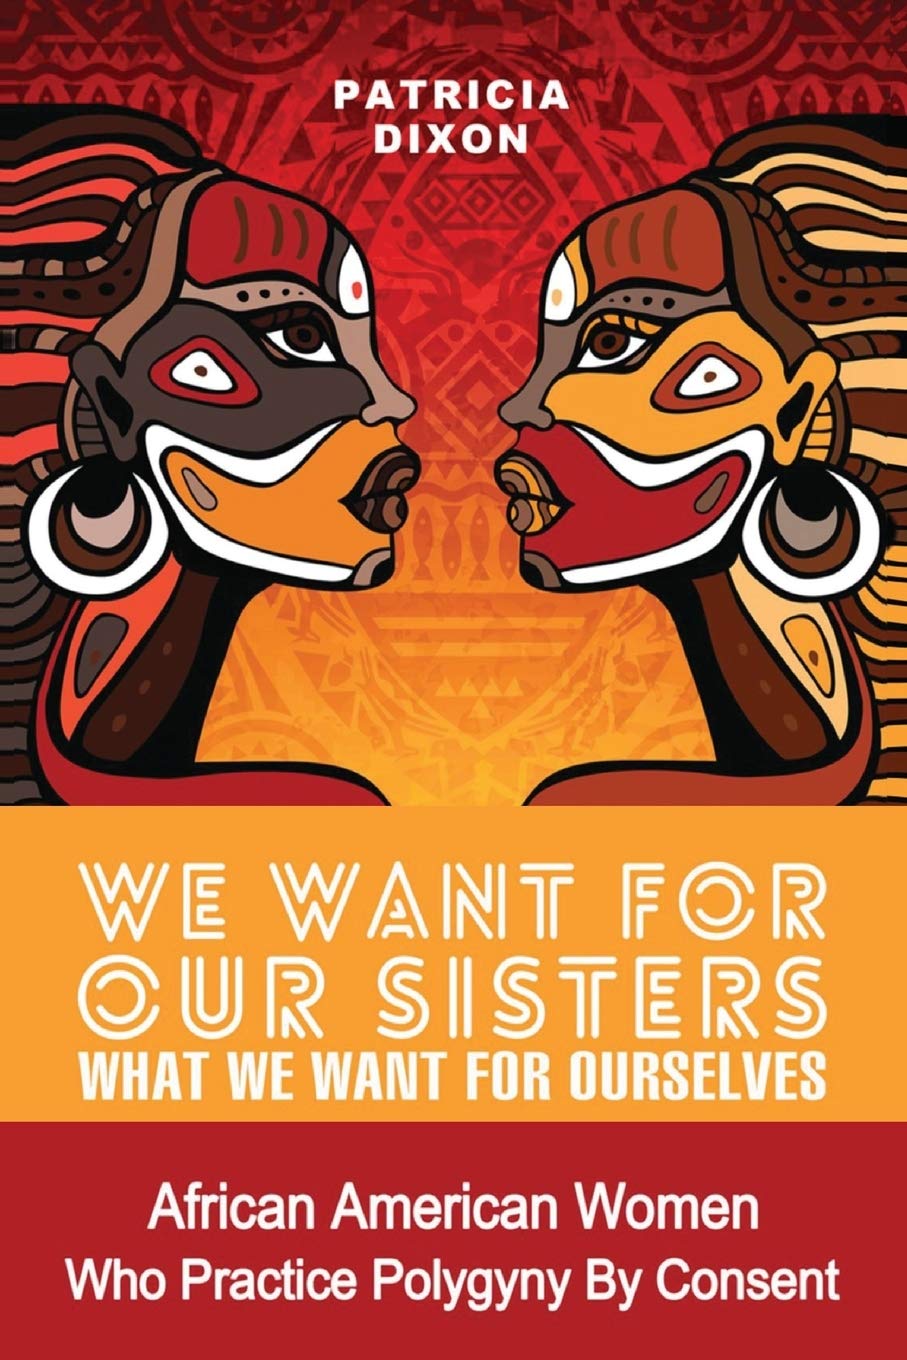 We Want for Our Sisters What We Want for Ourselves: African American Women Who Practice Polygyny/Polygamy by Consent (2ND ed.) by Patricia Dixon